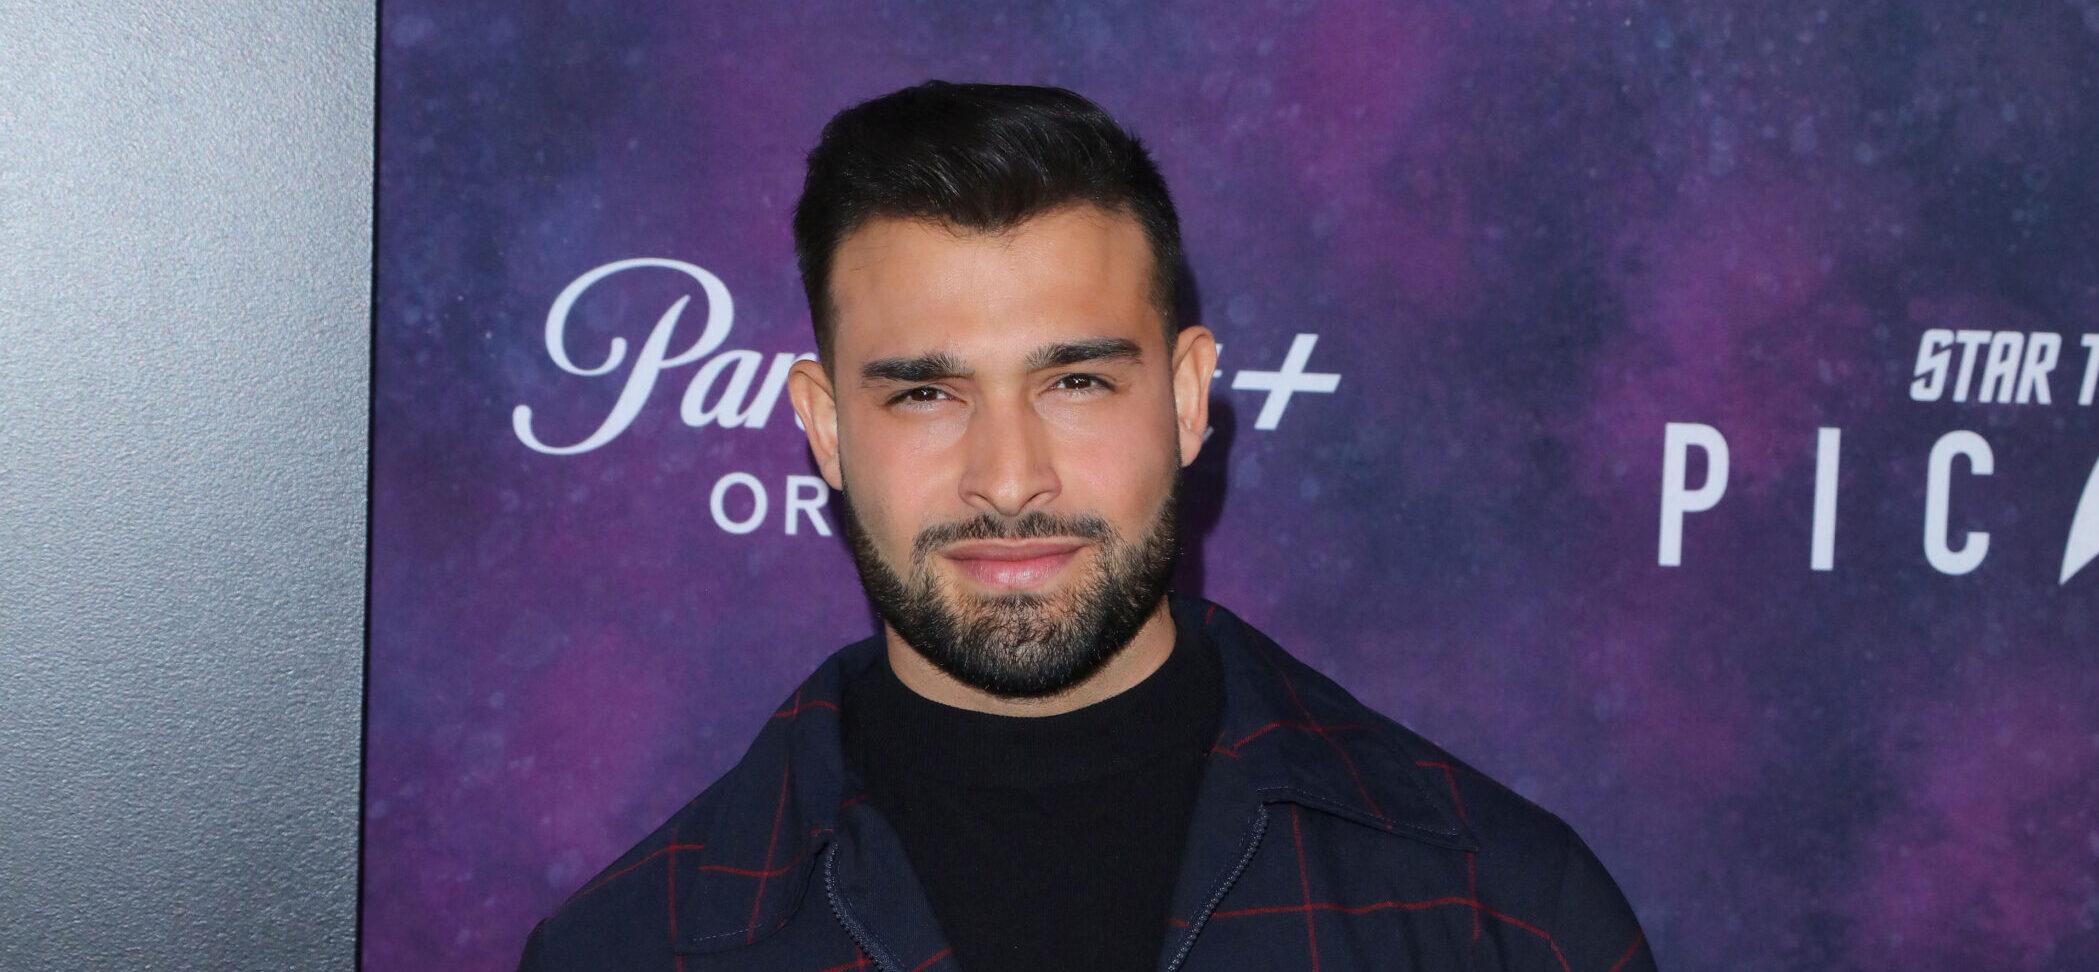 Britney Spears’ Ex Sam Asghari Poses With THIS Major Hollywood Star